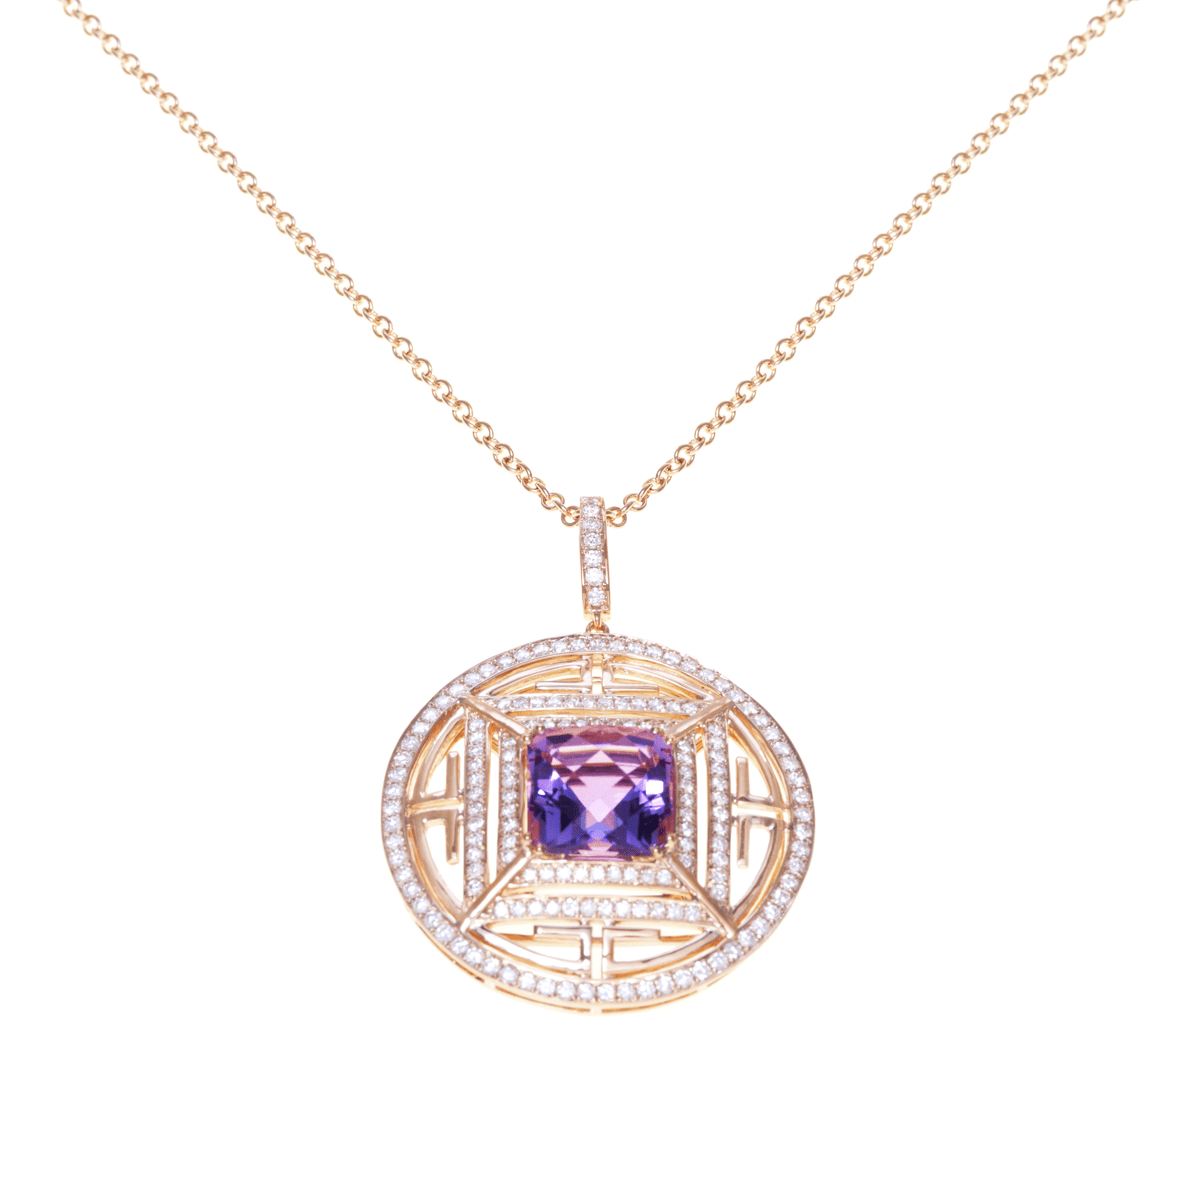 AMETHYST PENDANT -CHAMELEON - Chris Aire Fine Jewelry & Timepieces